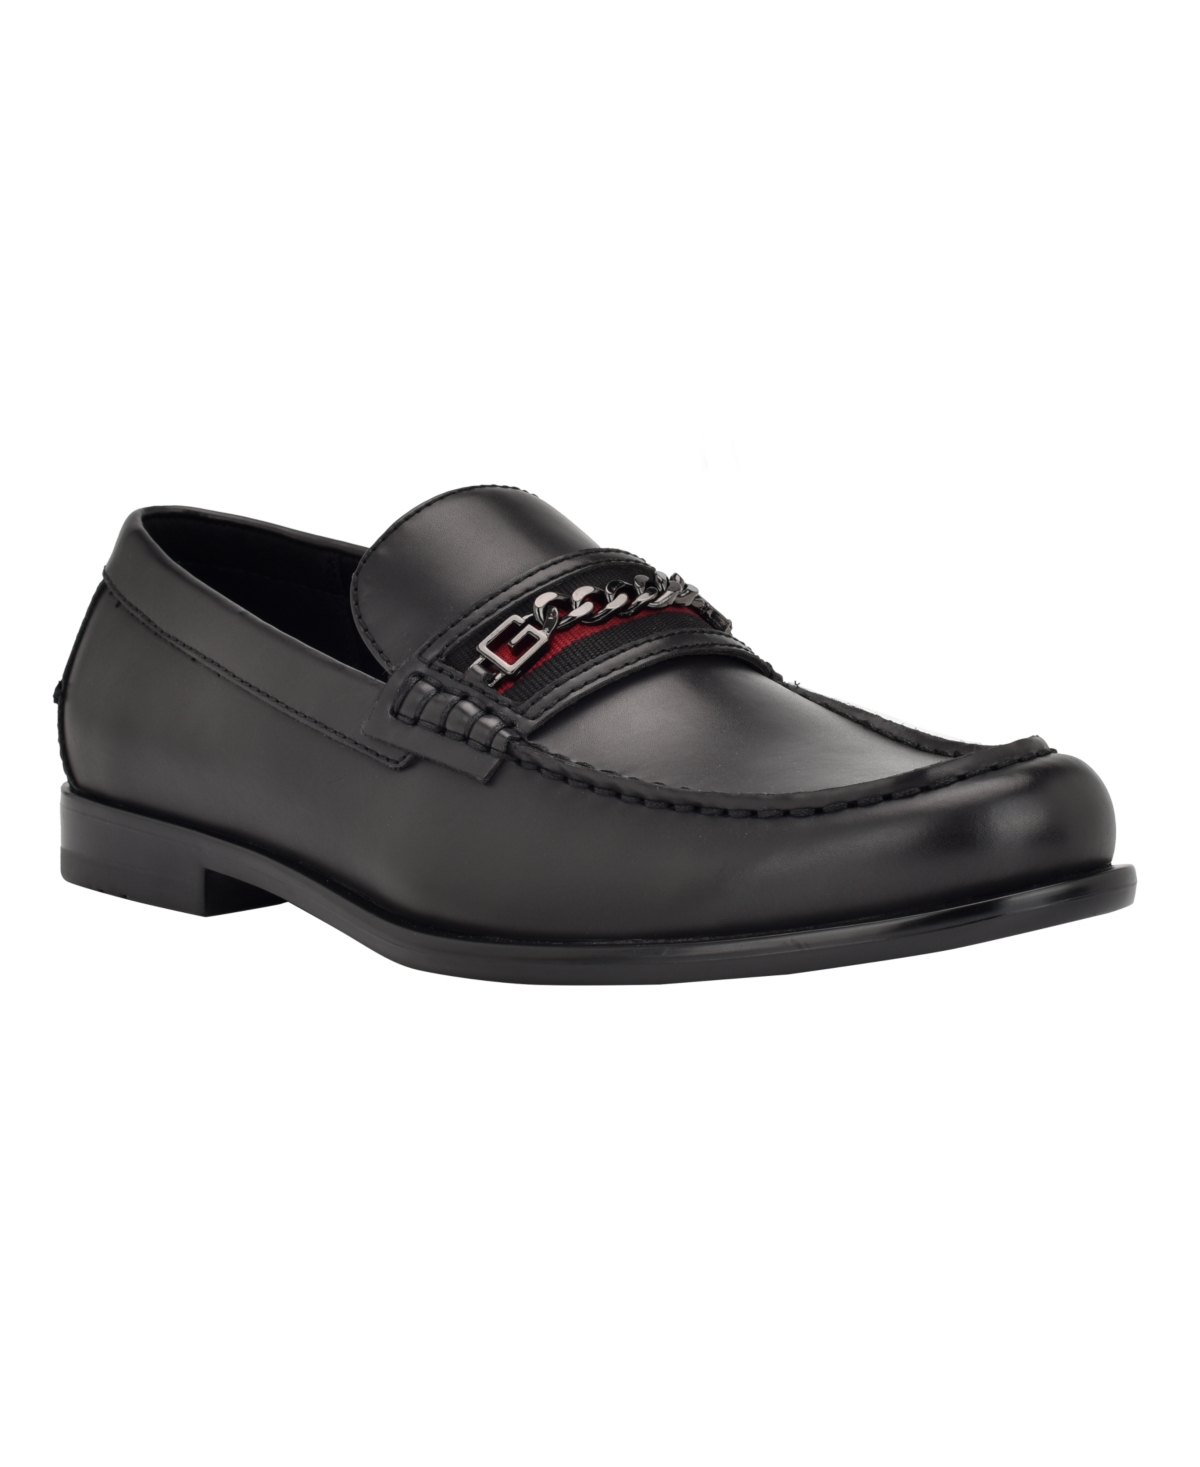 GUESS MEN'S CAMOX MOC-TOE SLIP-ON DRIVING LOAFERS MEN'S SHOES